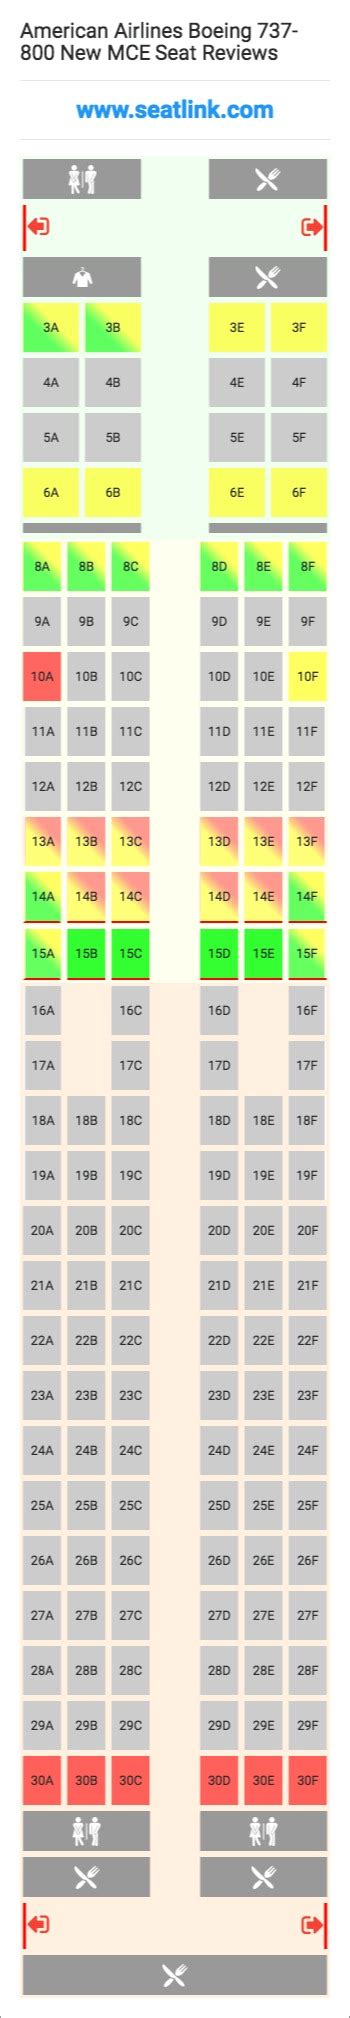 American Airlines Boeing 737 800 New Mce Seating Chart Updated